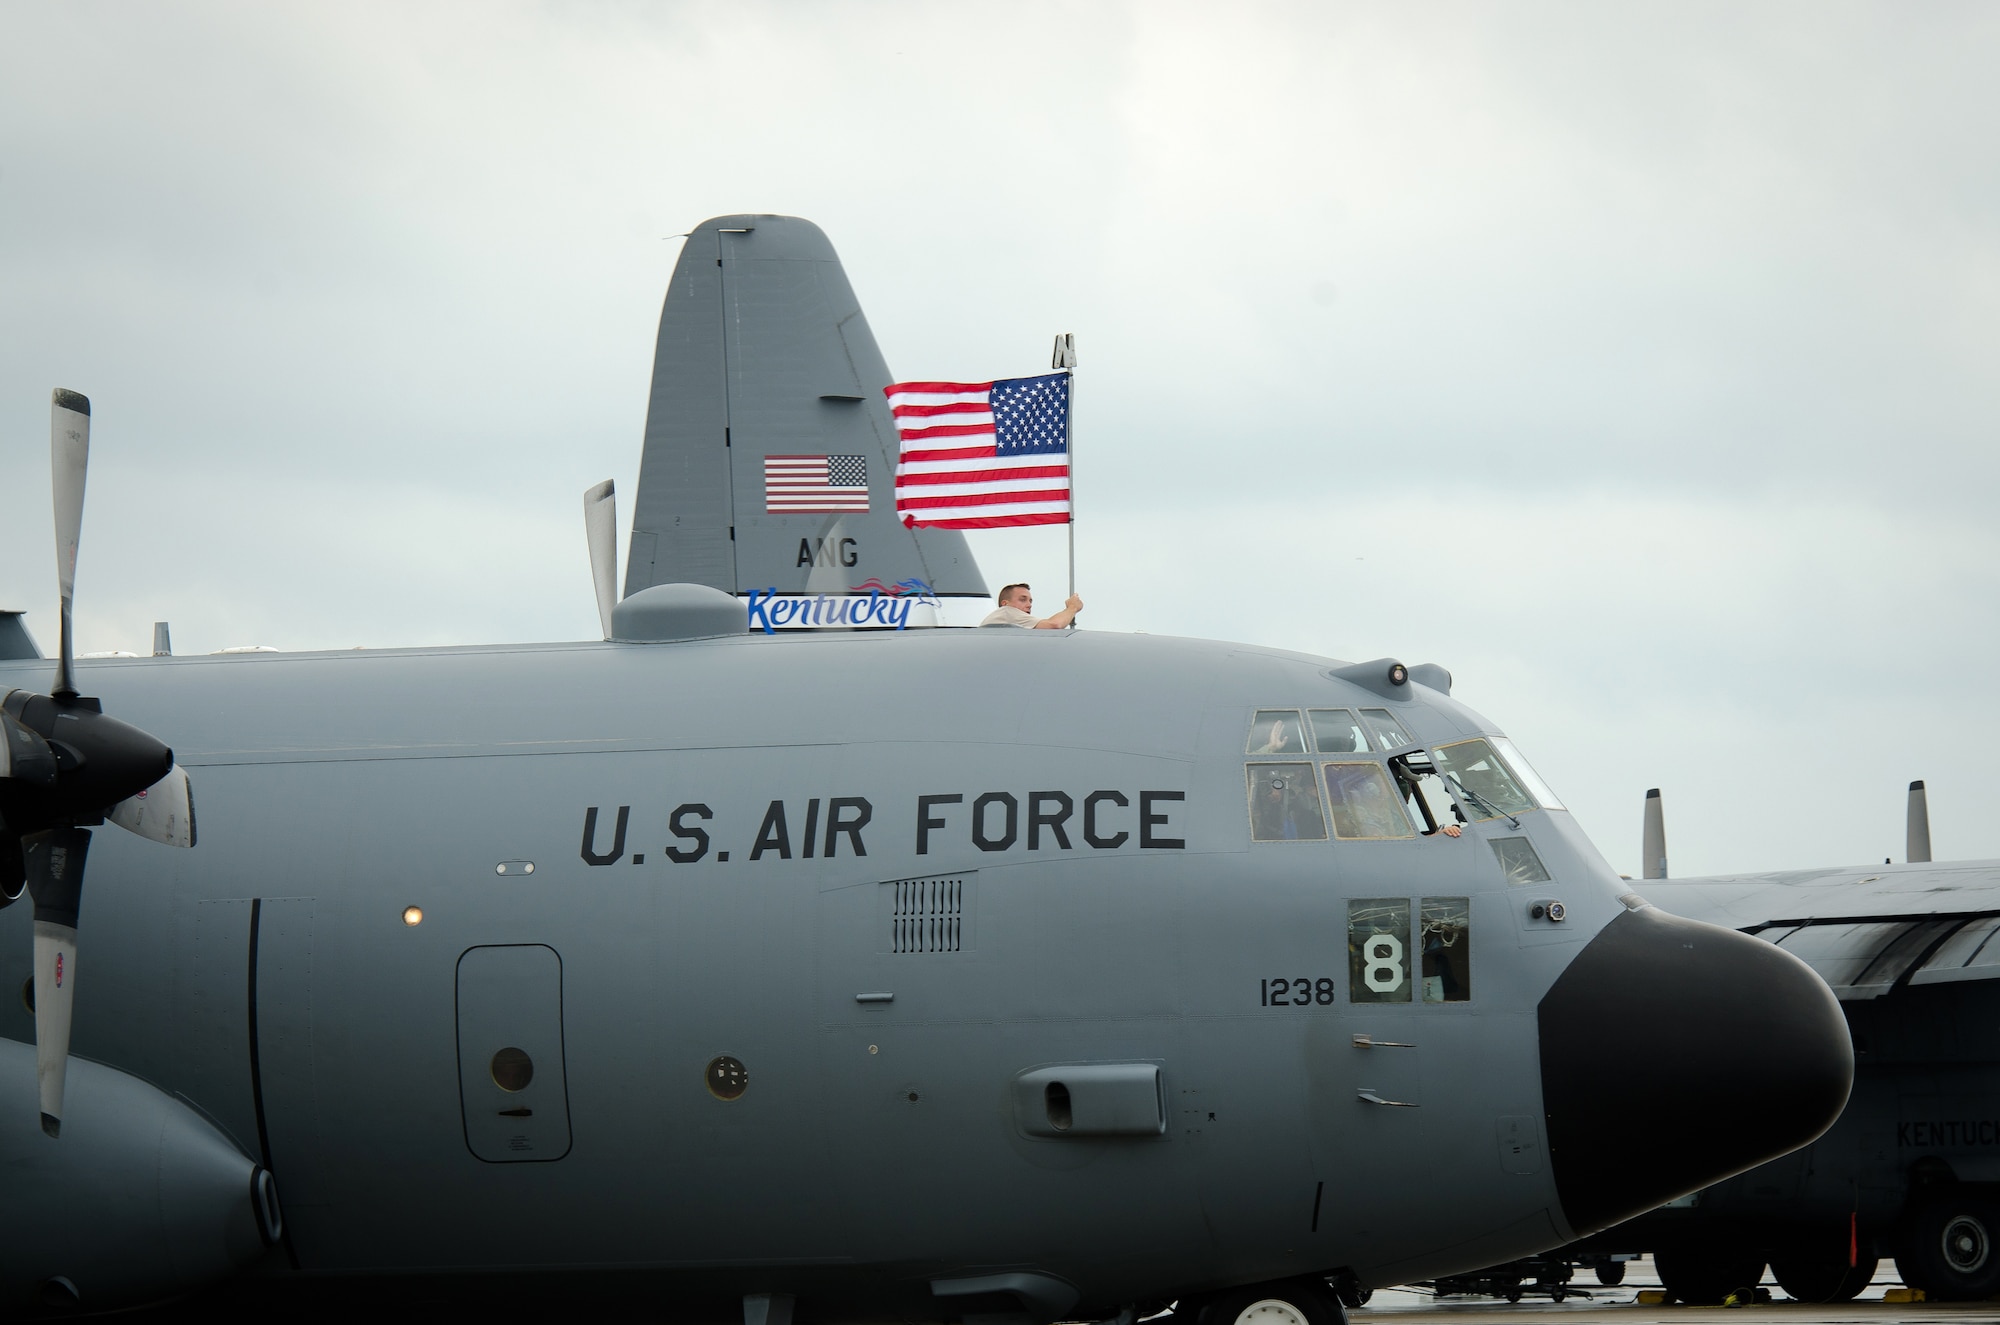 Tech. Sgt. David Clark, an aircrew flight equipment technician for the 123rd Airlift Wing, flies the American Flag atop a Kentucky Air Guard C-130 Hercules after landing for a homecoming ceremony at the Kentucky Air National Guard Base in Louisville, Ky., July 8, 2015. Thirty Kentucky Air Guardsmen returned from a deployment to the Persian Gulf Region, where they’ve been supporting Operation Freedom’s Sentinel since February. (U.S. Air National Guard photo by Master Sgt. Phil Speck)